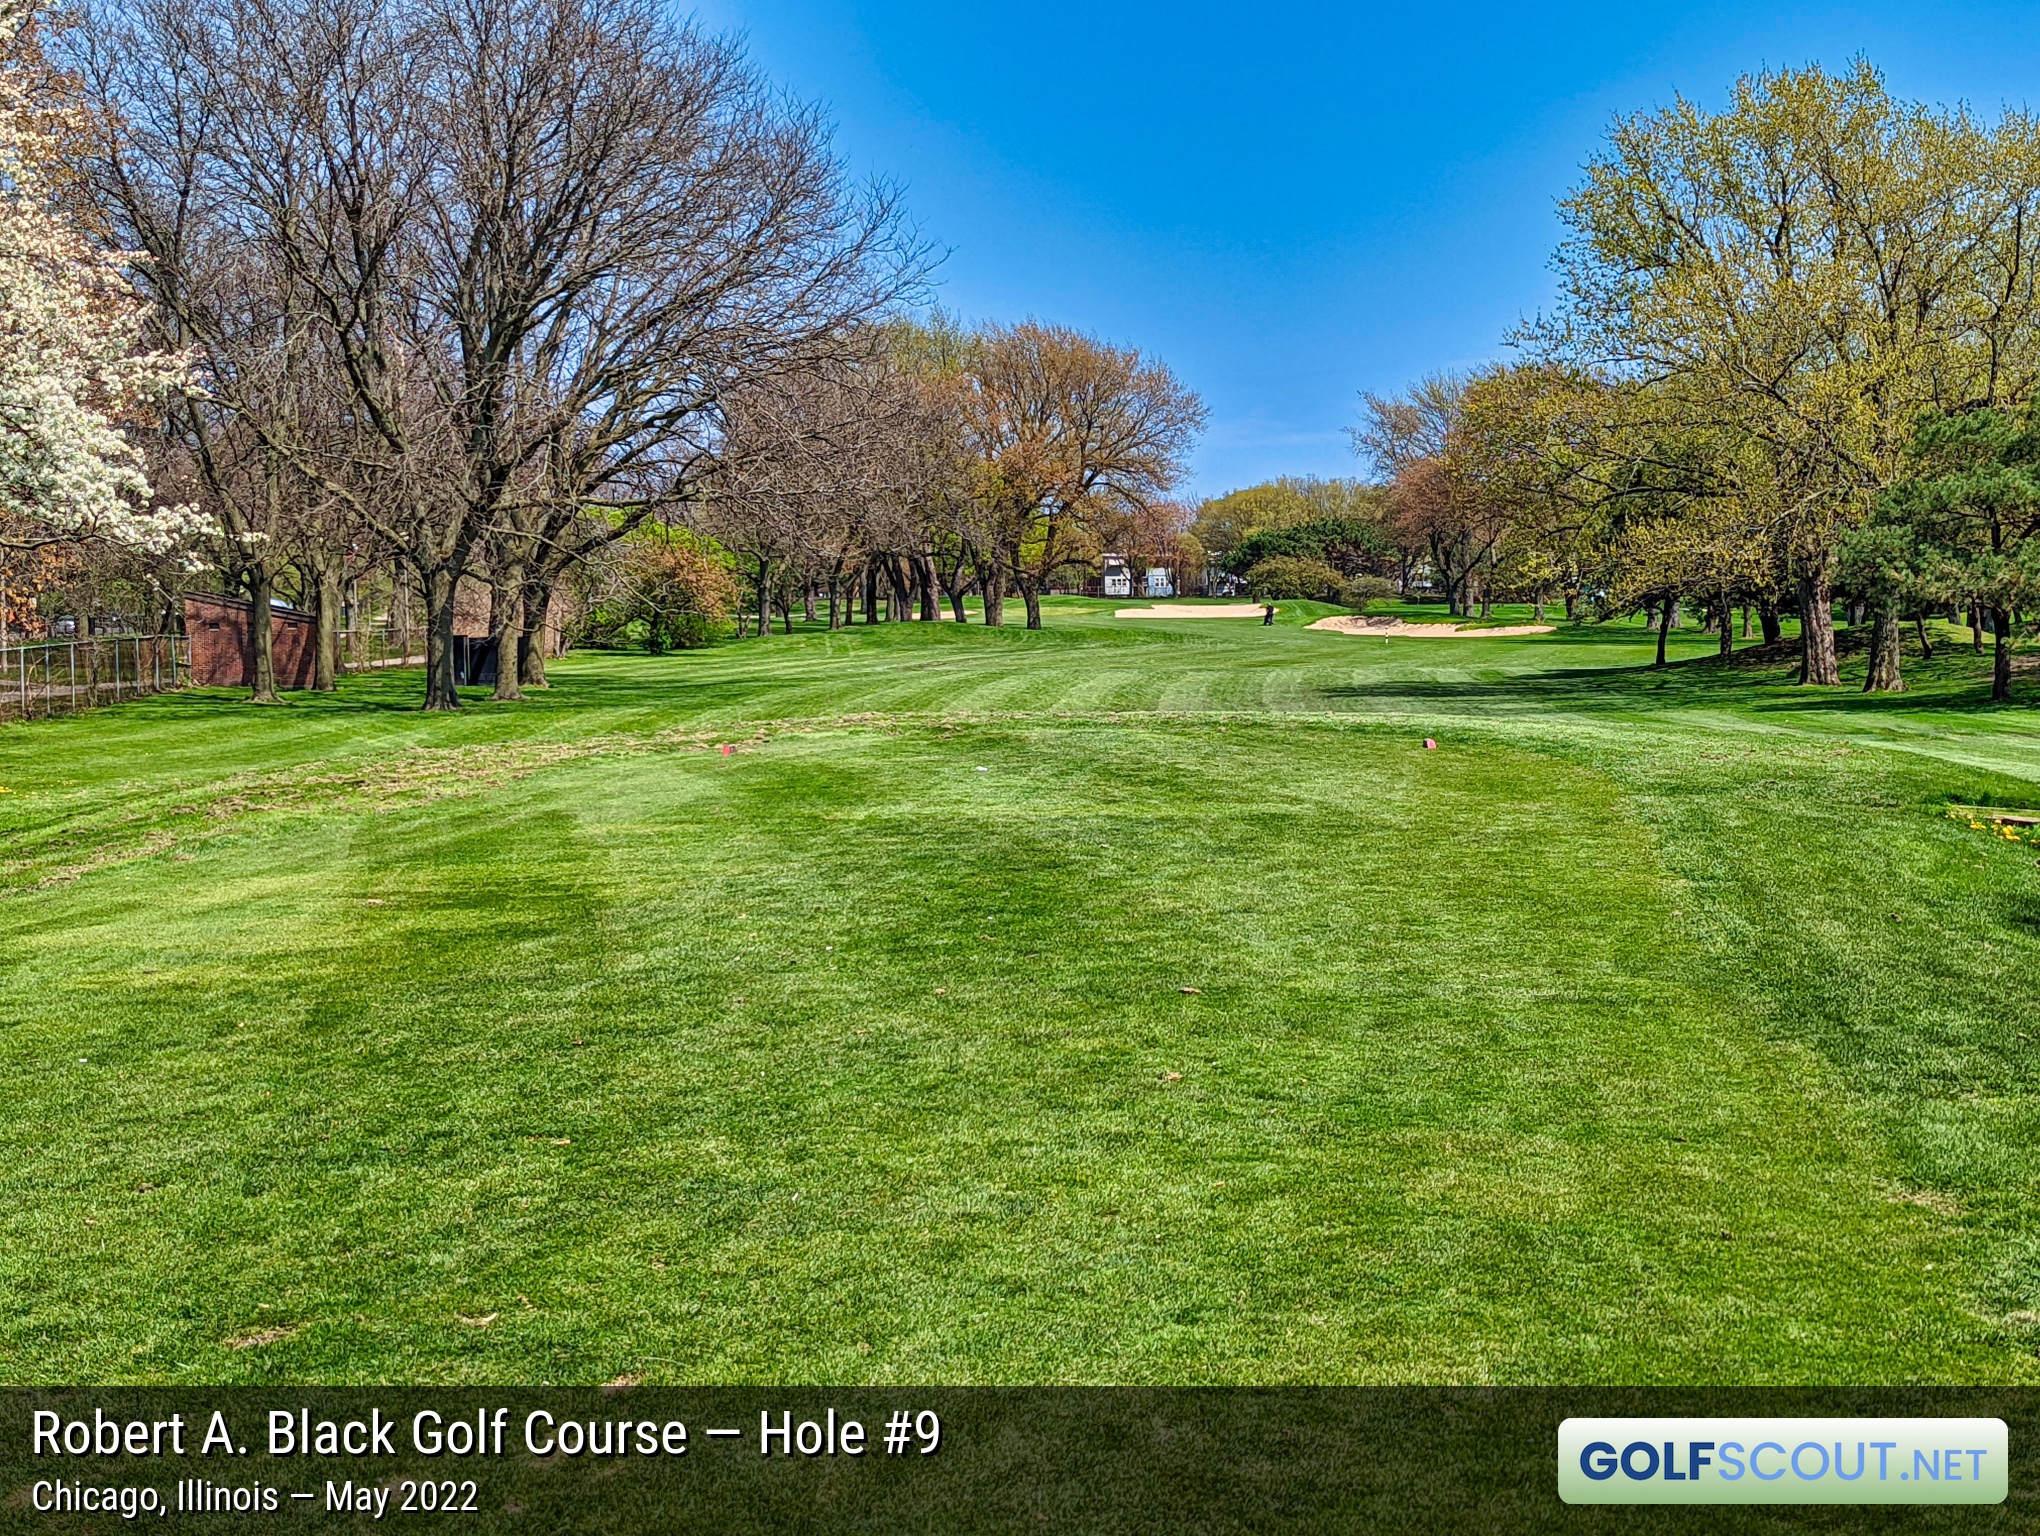 Photo of hole #9 at Robert A. Black Golf Course in Chicago, Illinois. 